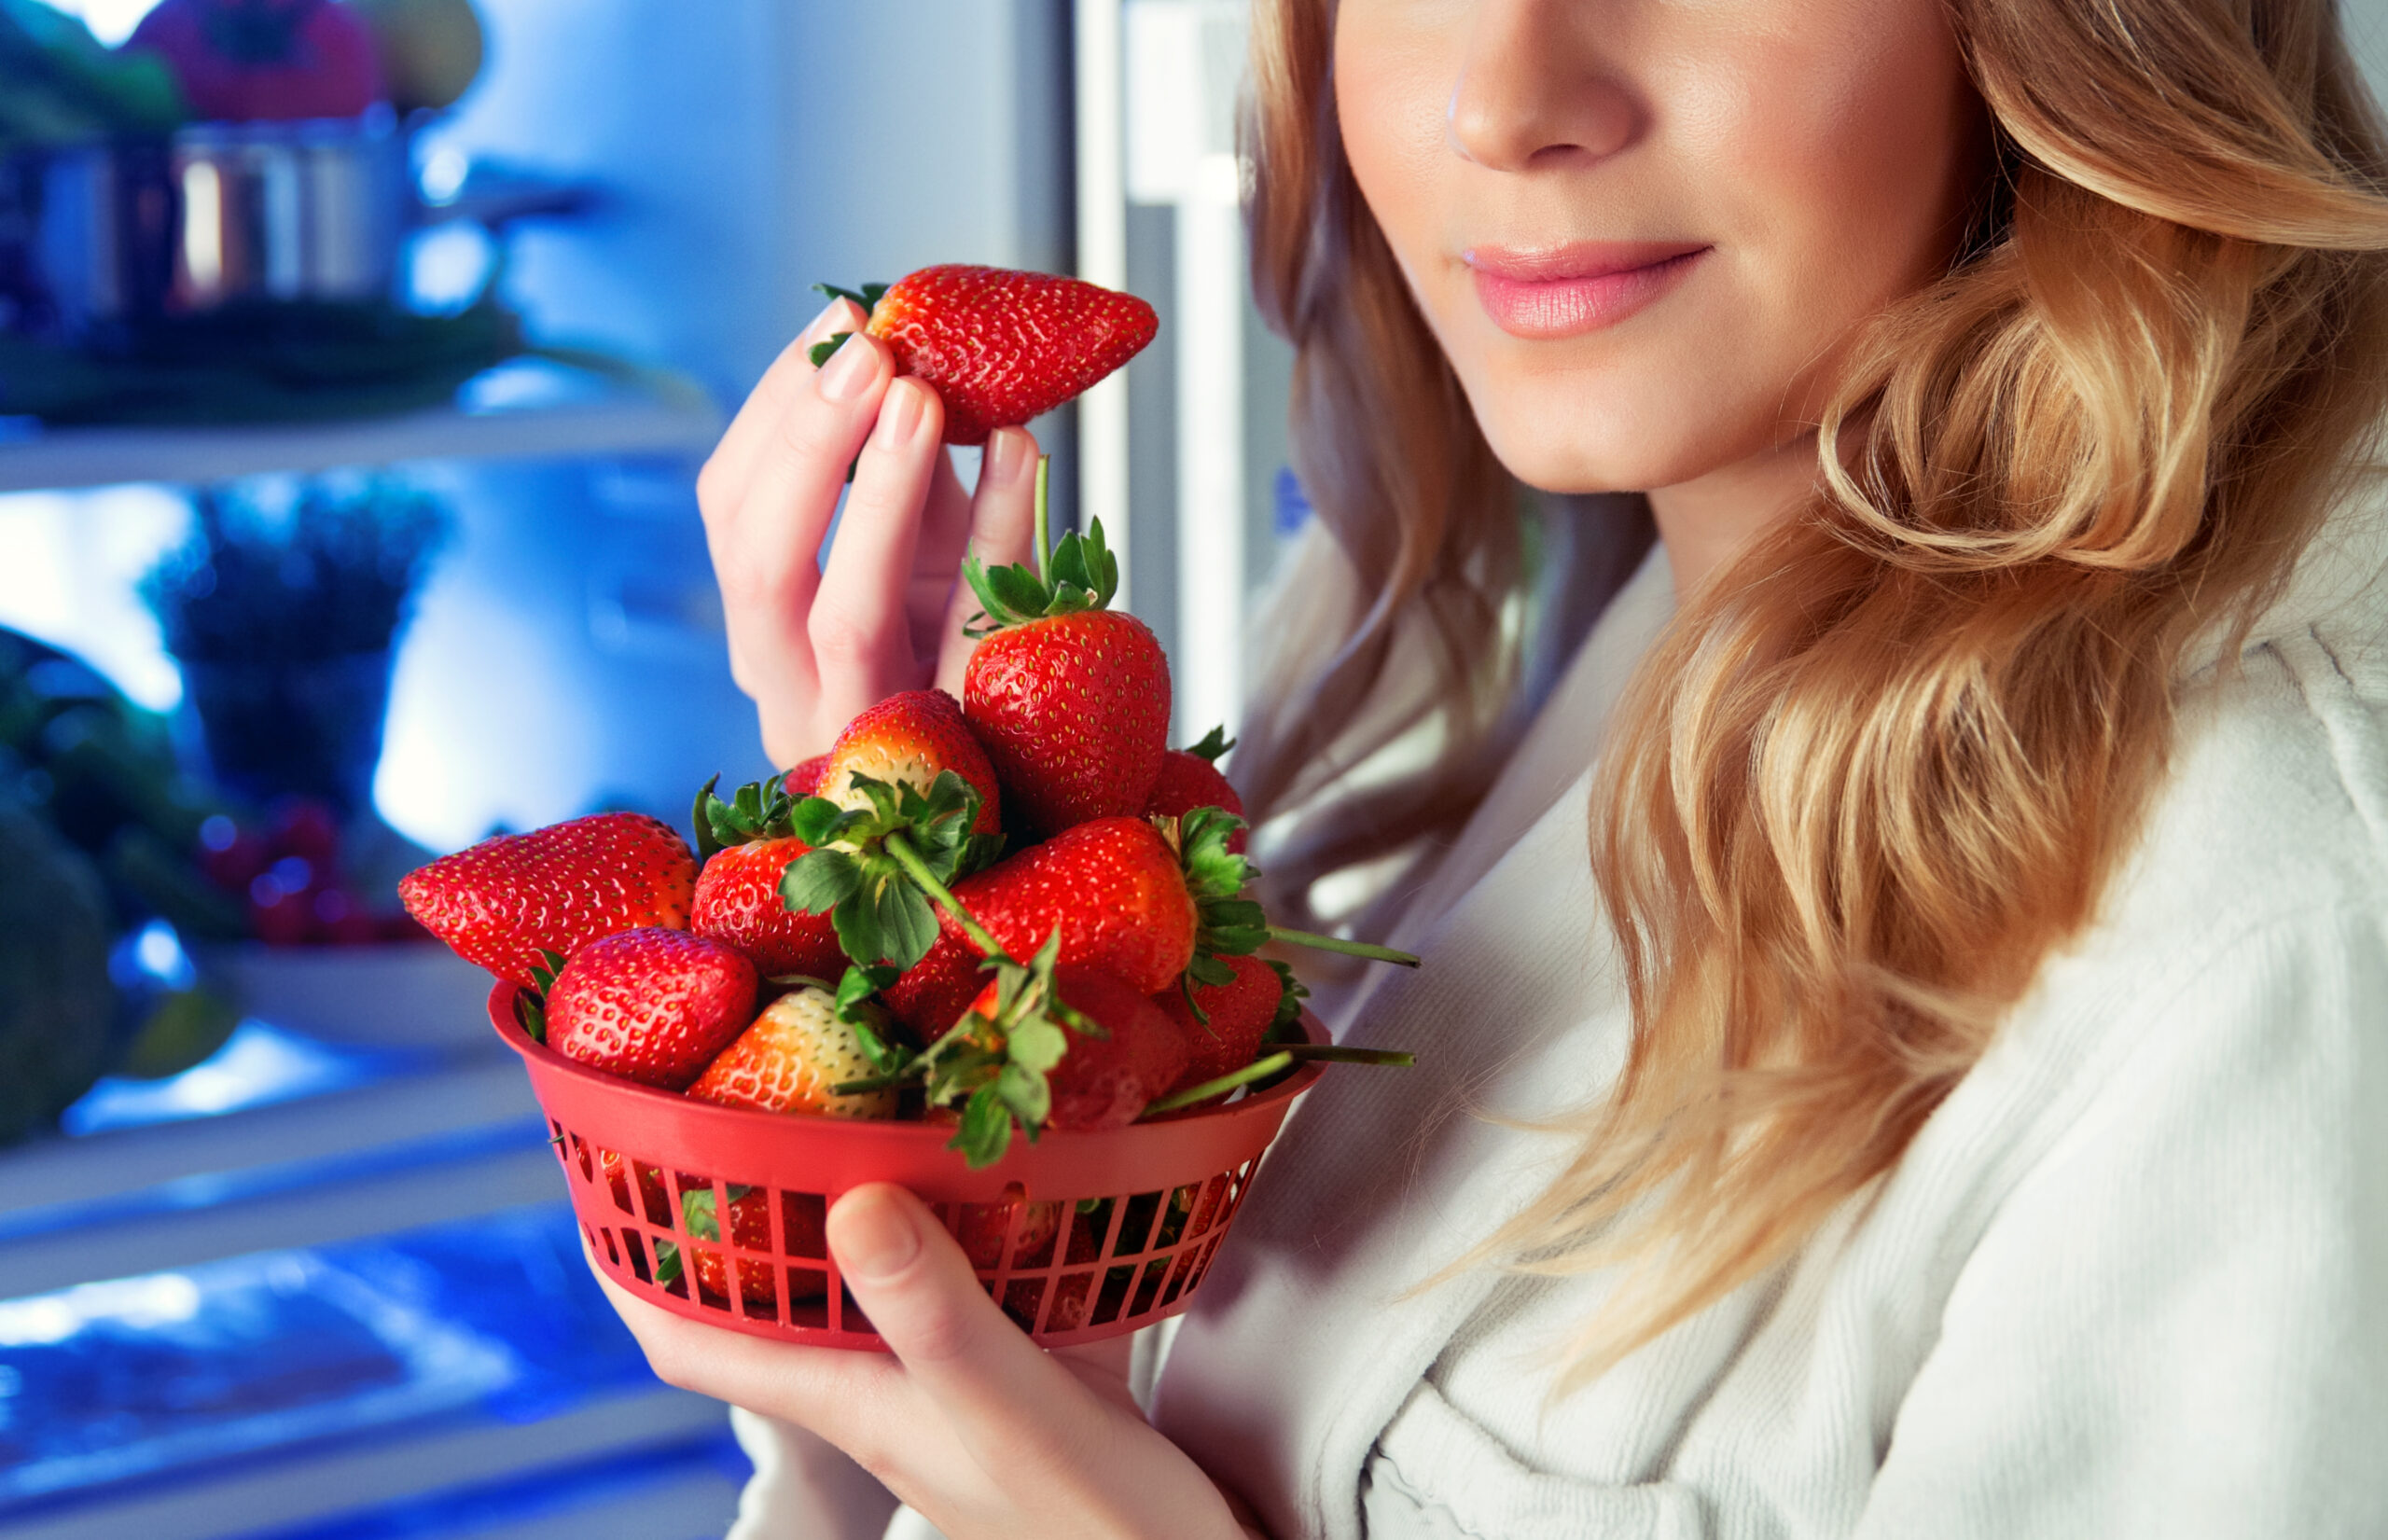 Portrait of a nice blond woman with pleasure eating fresh tasty strawberries near the open fridge, good choice, vegetarian food, weight loss, fruits diet